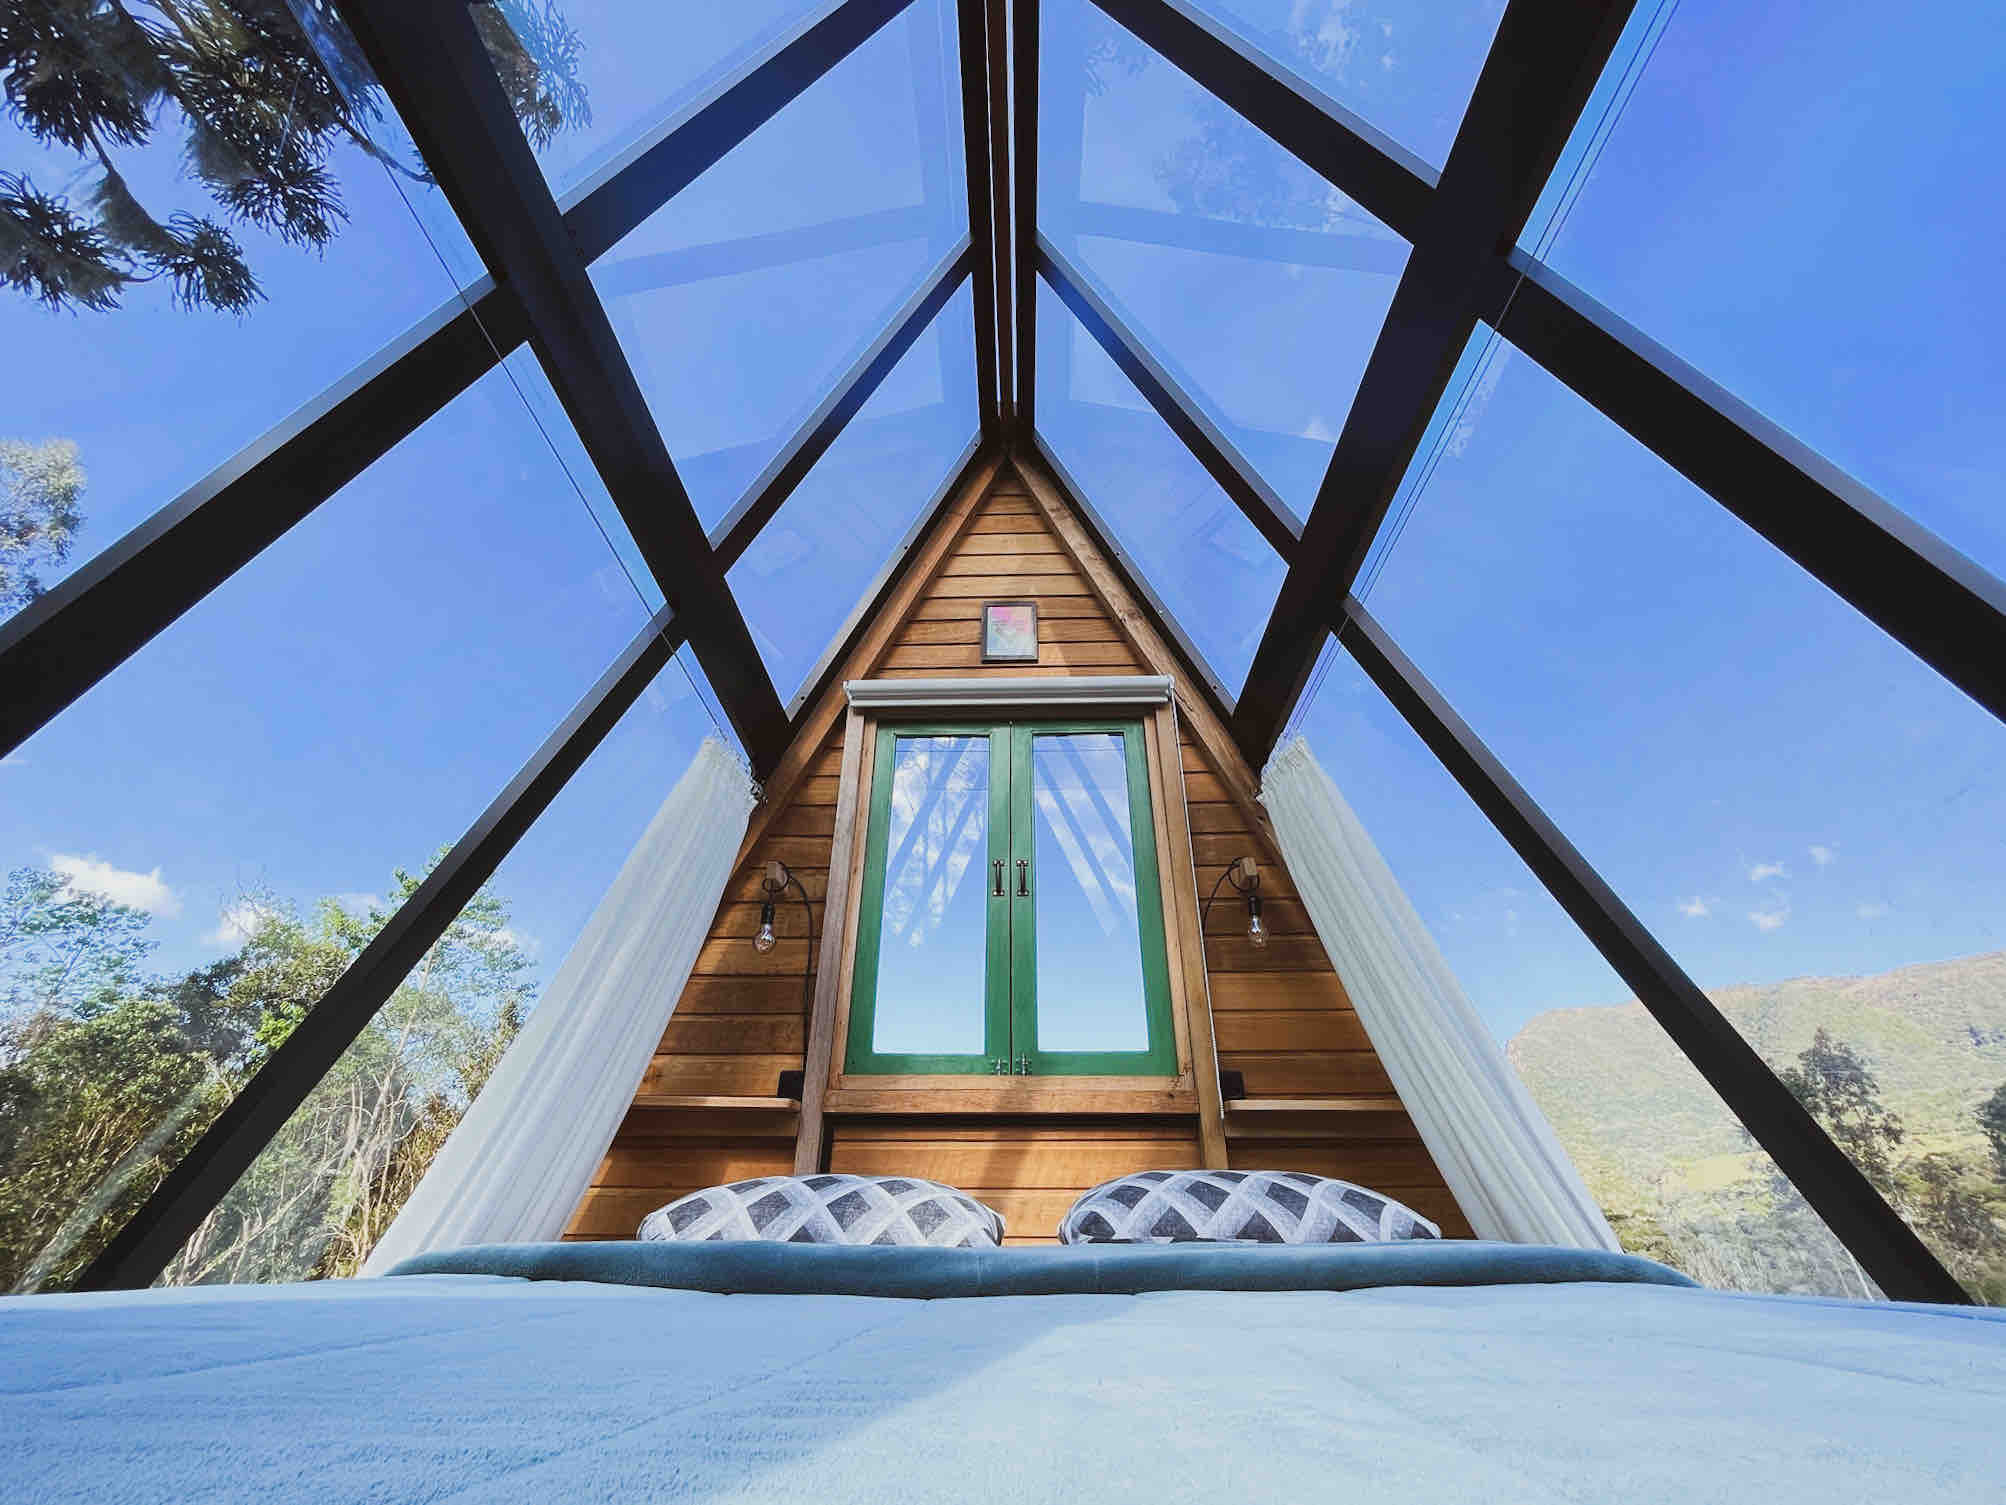 View of the bed inside of a glass pyramid with the blue sky in the top